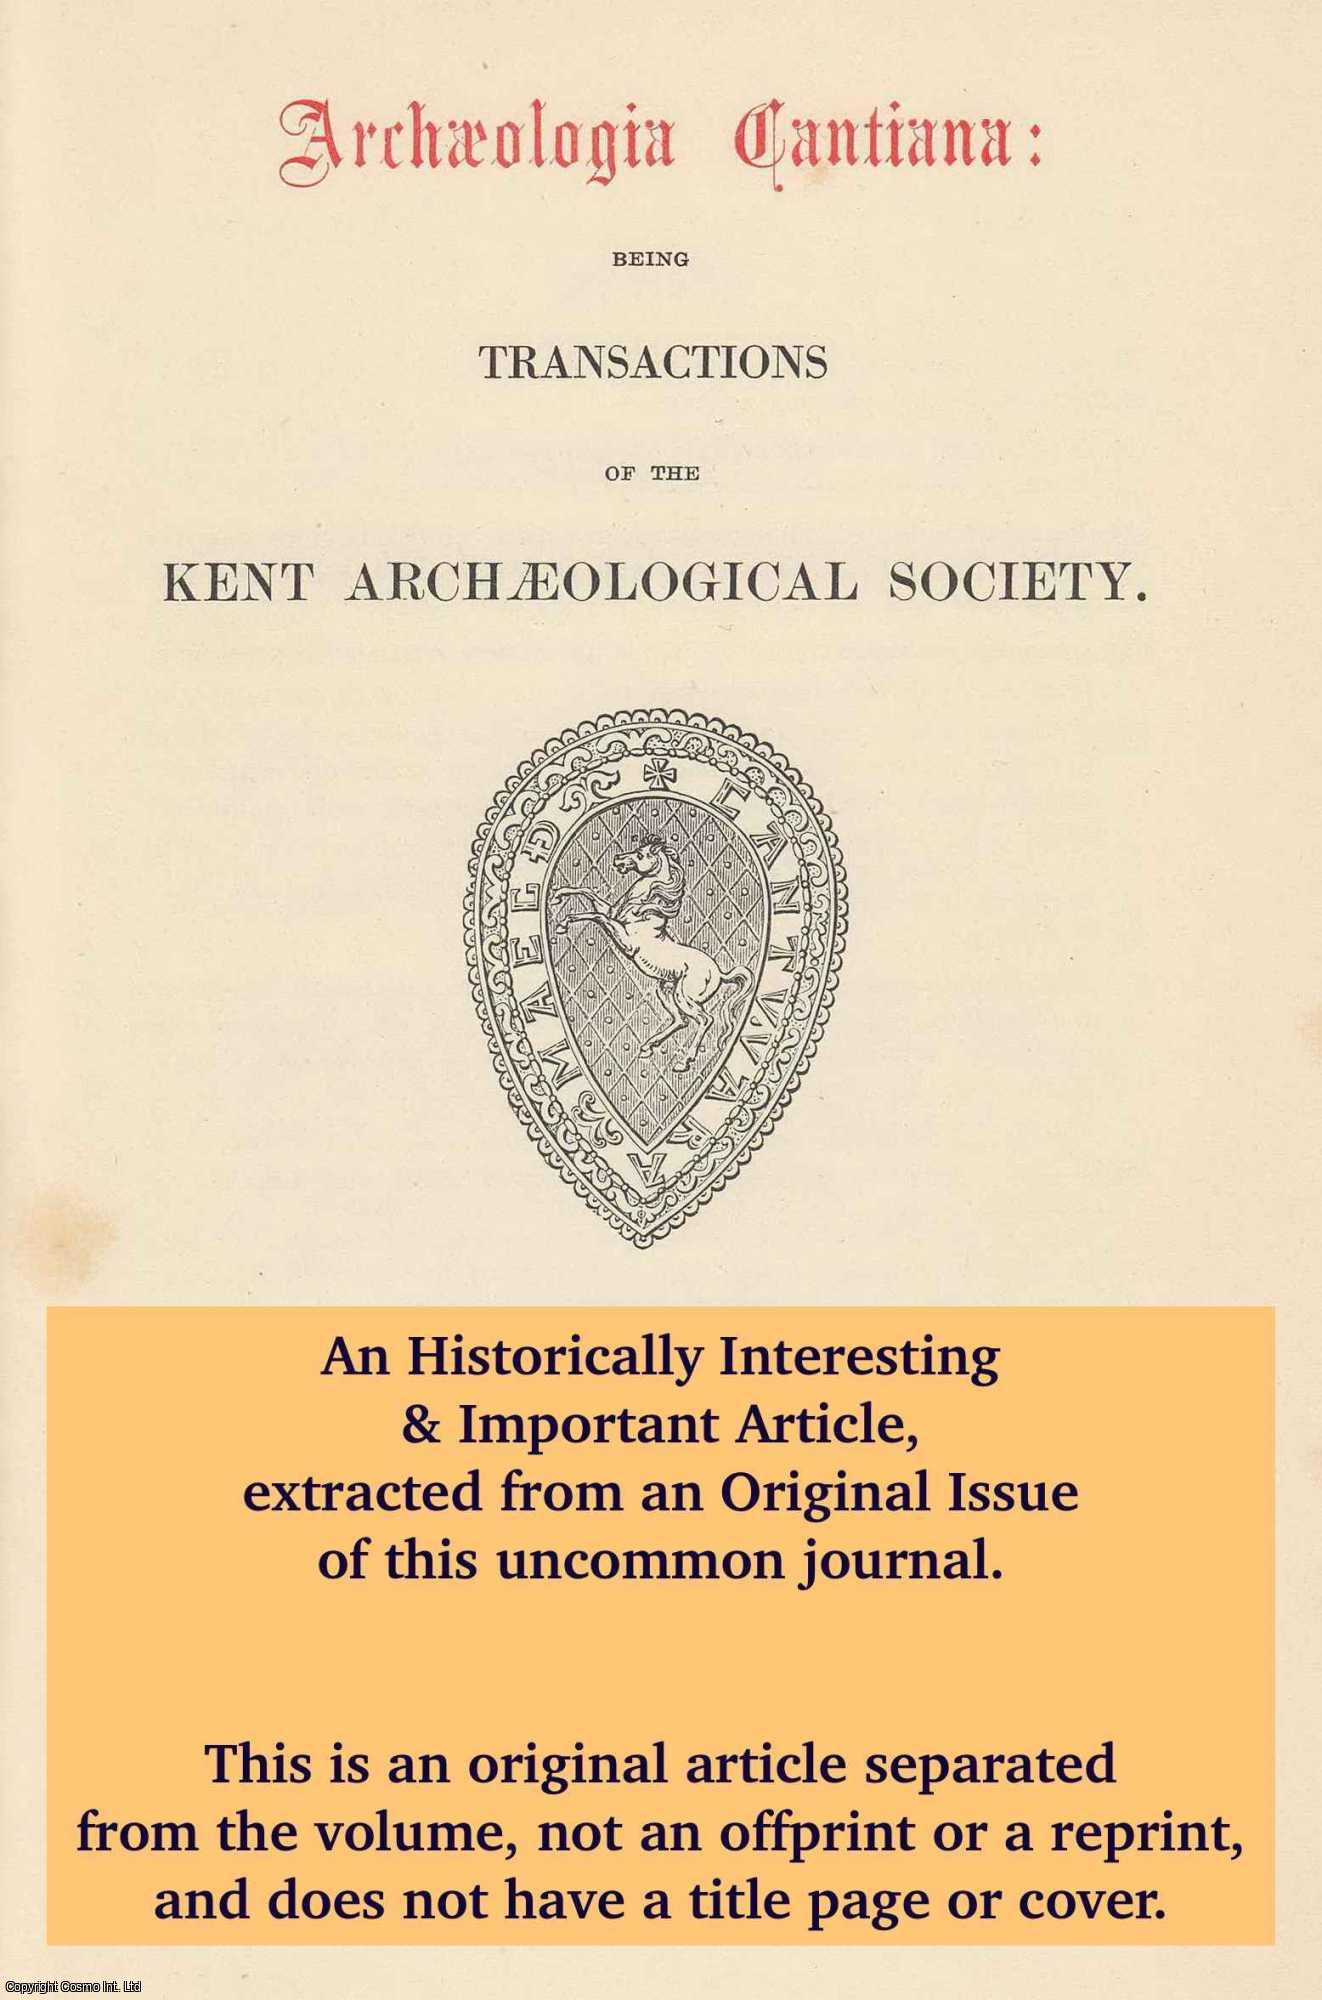 A.F. Butcher - Sandwich in the Thirteenth Century. An original article from The Archaeologia Cantiana: Transactions of The Kent Archaeological Society, 1978.